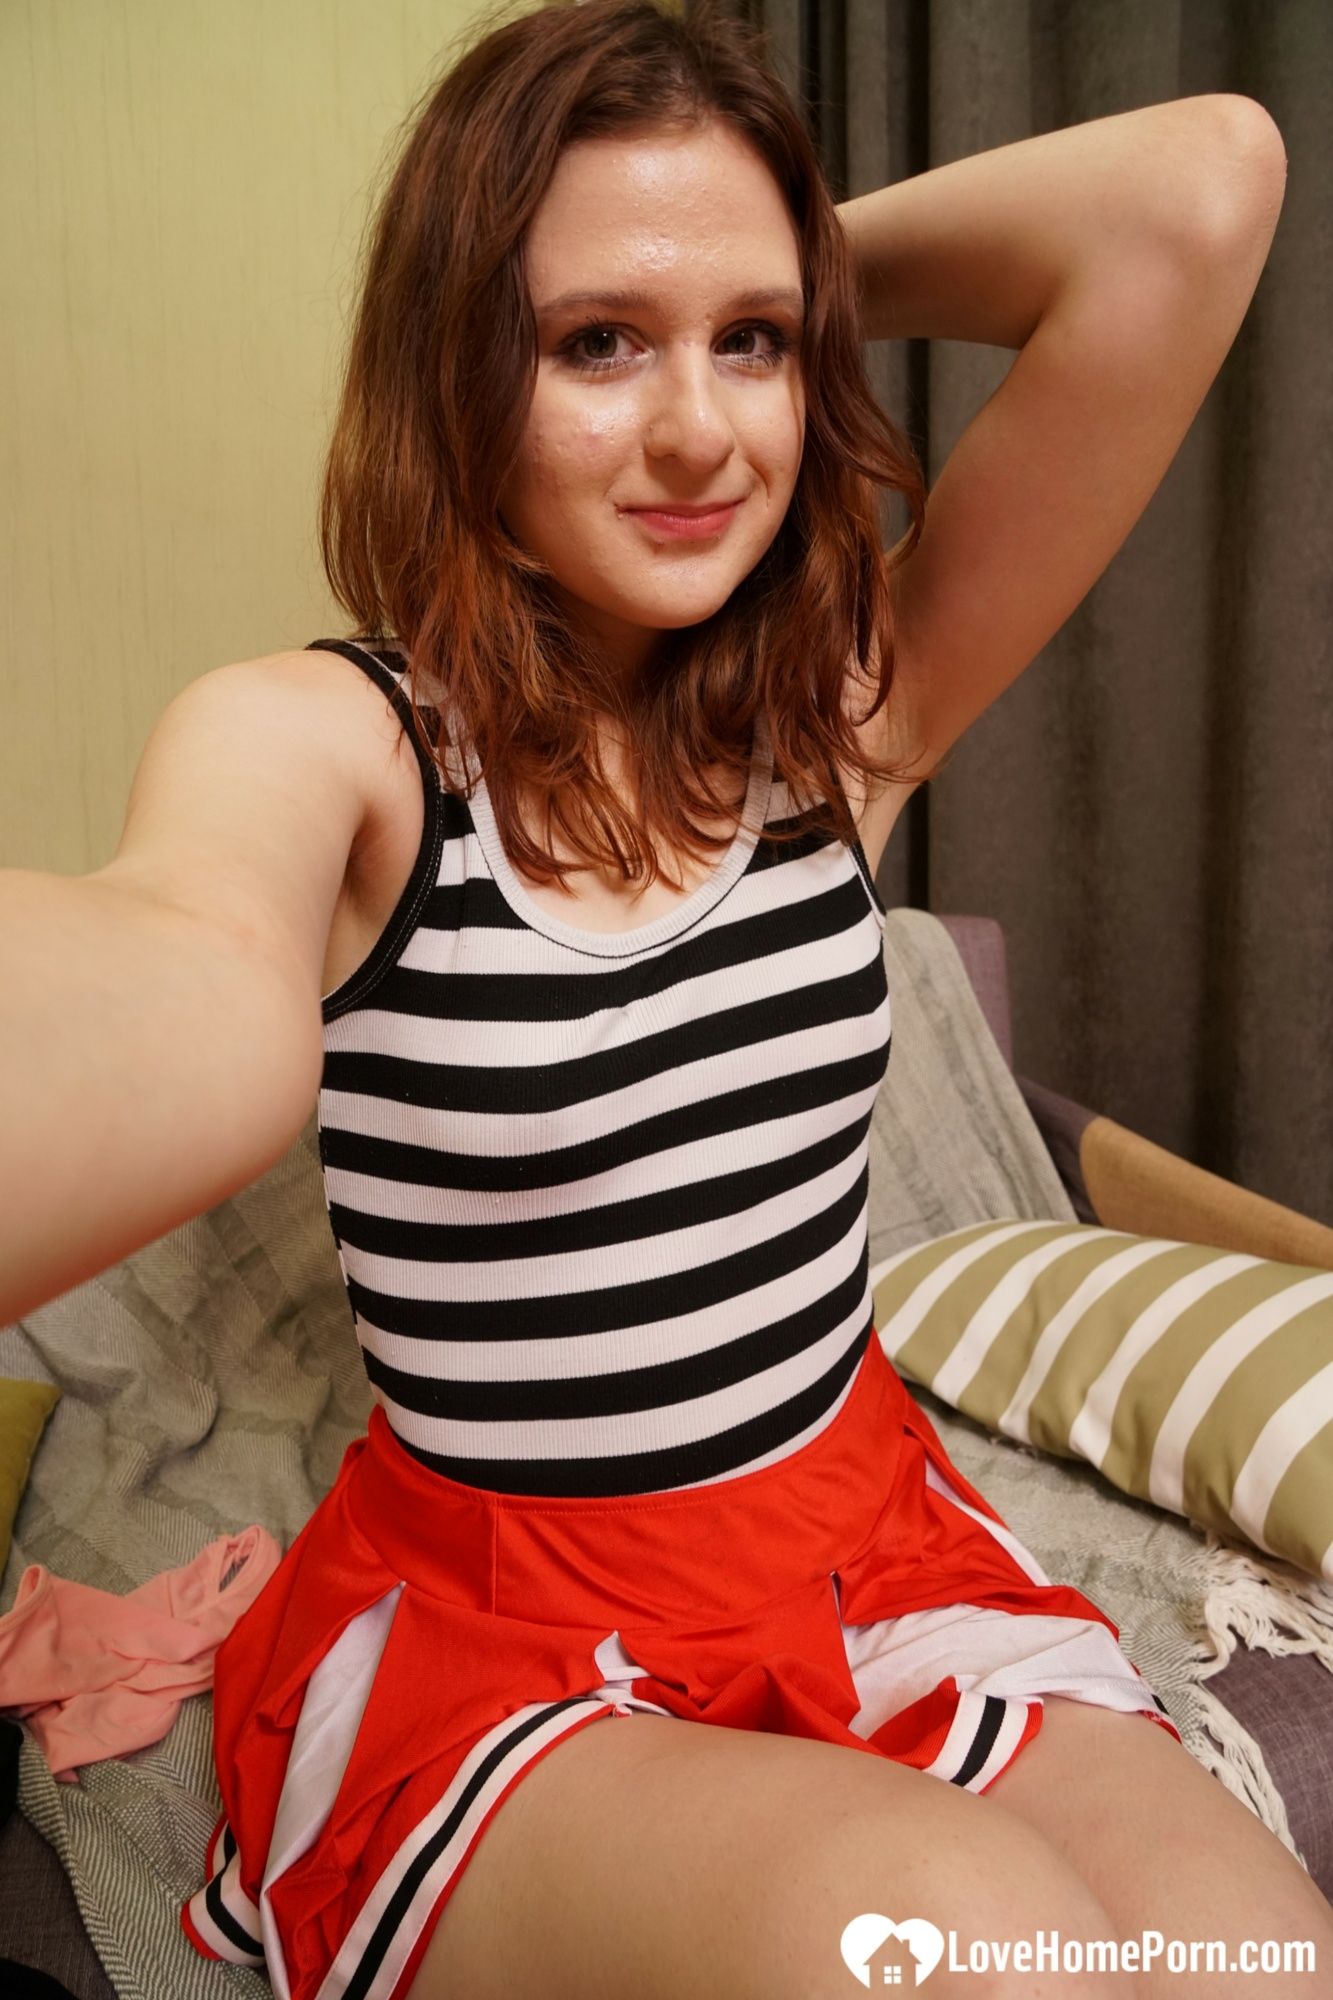 Redhead cutie shows off outfits and gets nude #19